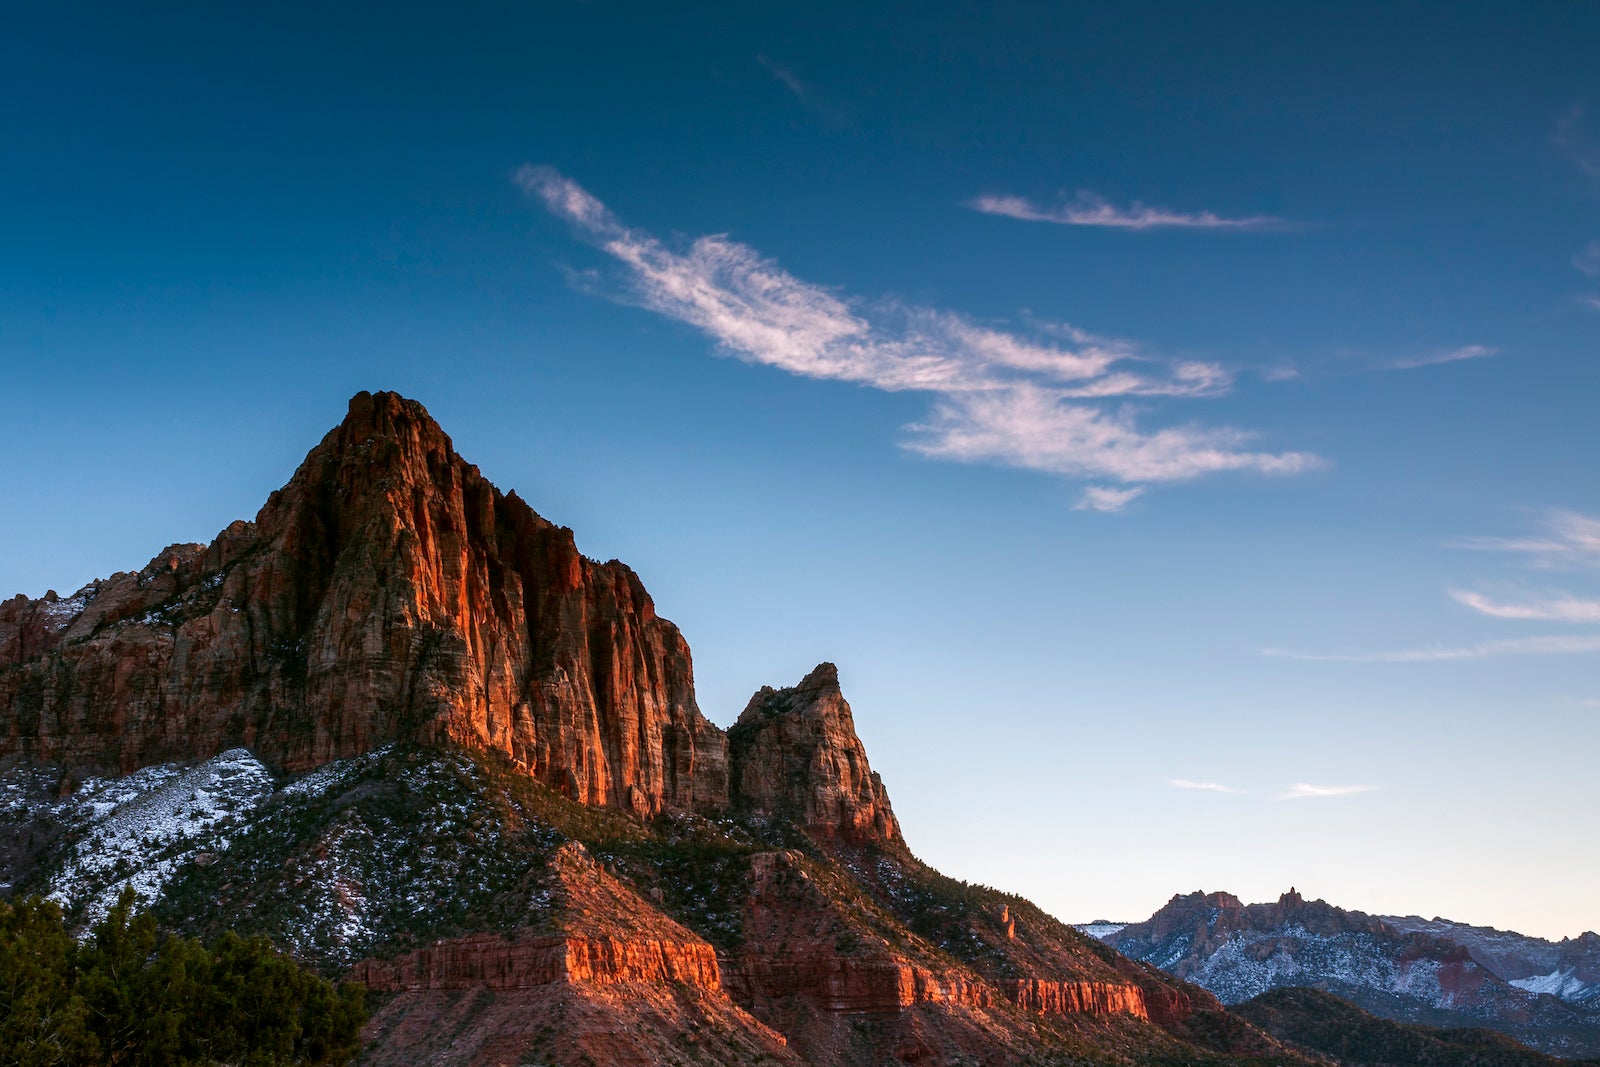 Last Light on the Watchman - Zion National Park